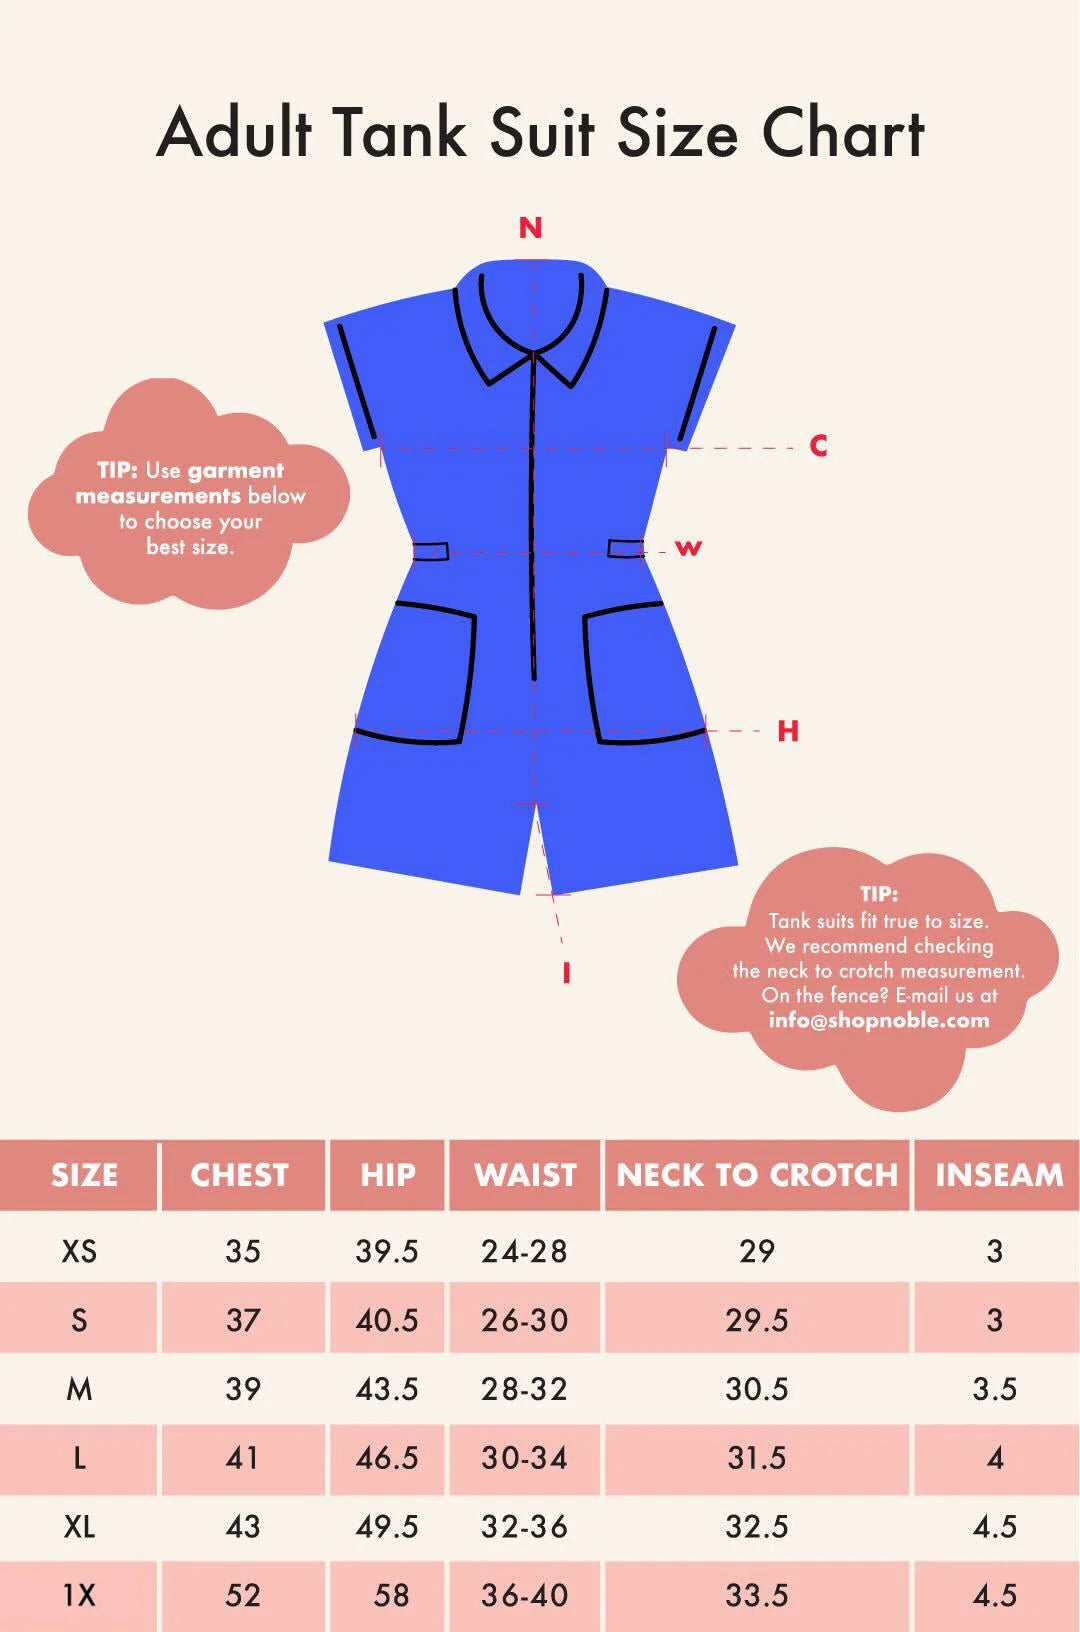 A size chart for the Adult Tank Suit. 